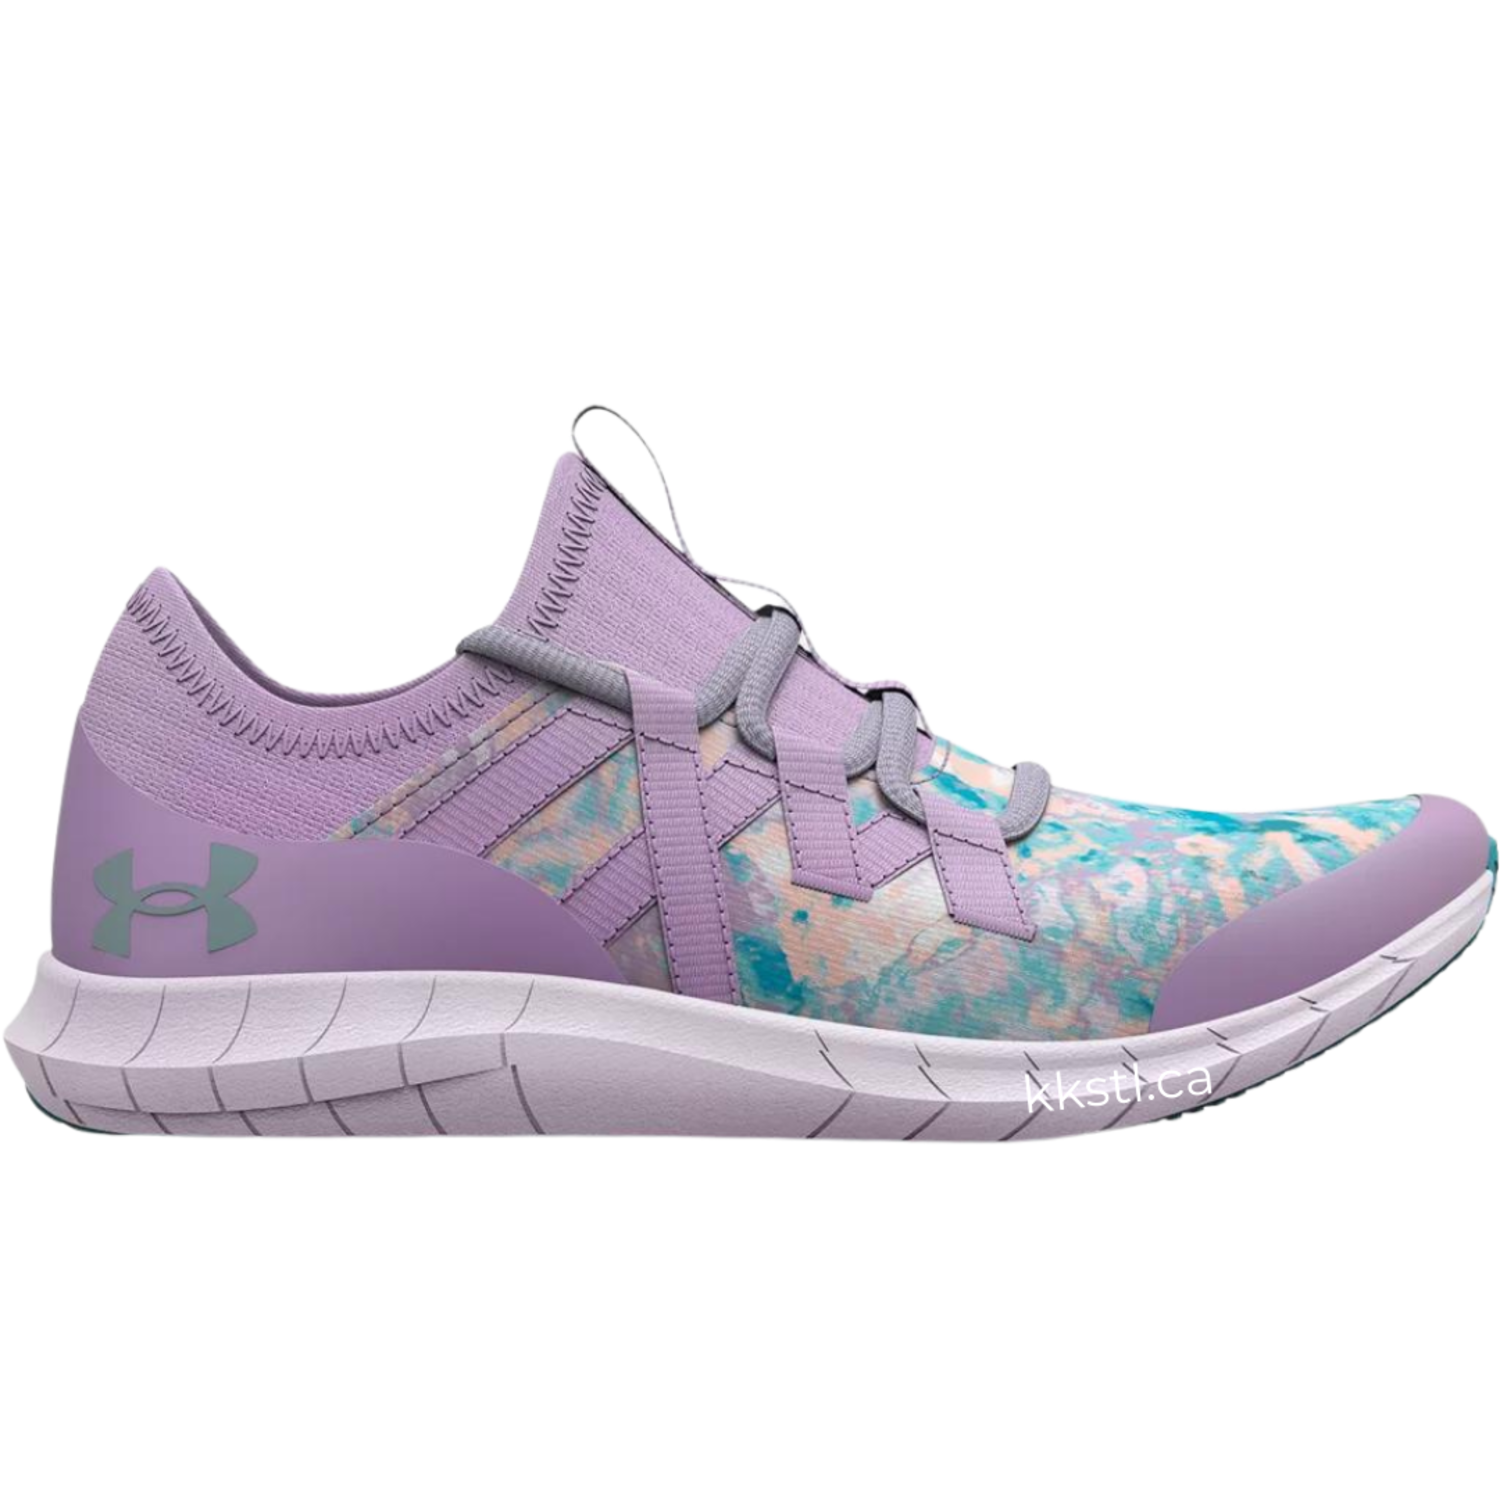 Under Armour PS/GS Infinity 3 SKY - Kids Shoes in Canada - Kiddie